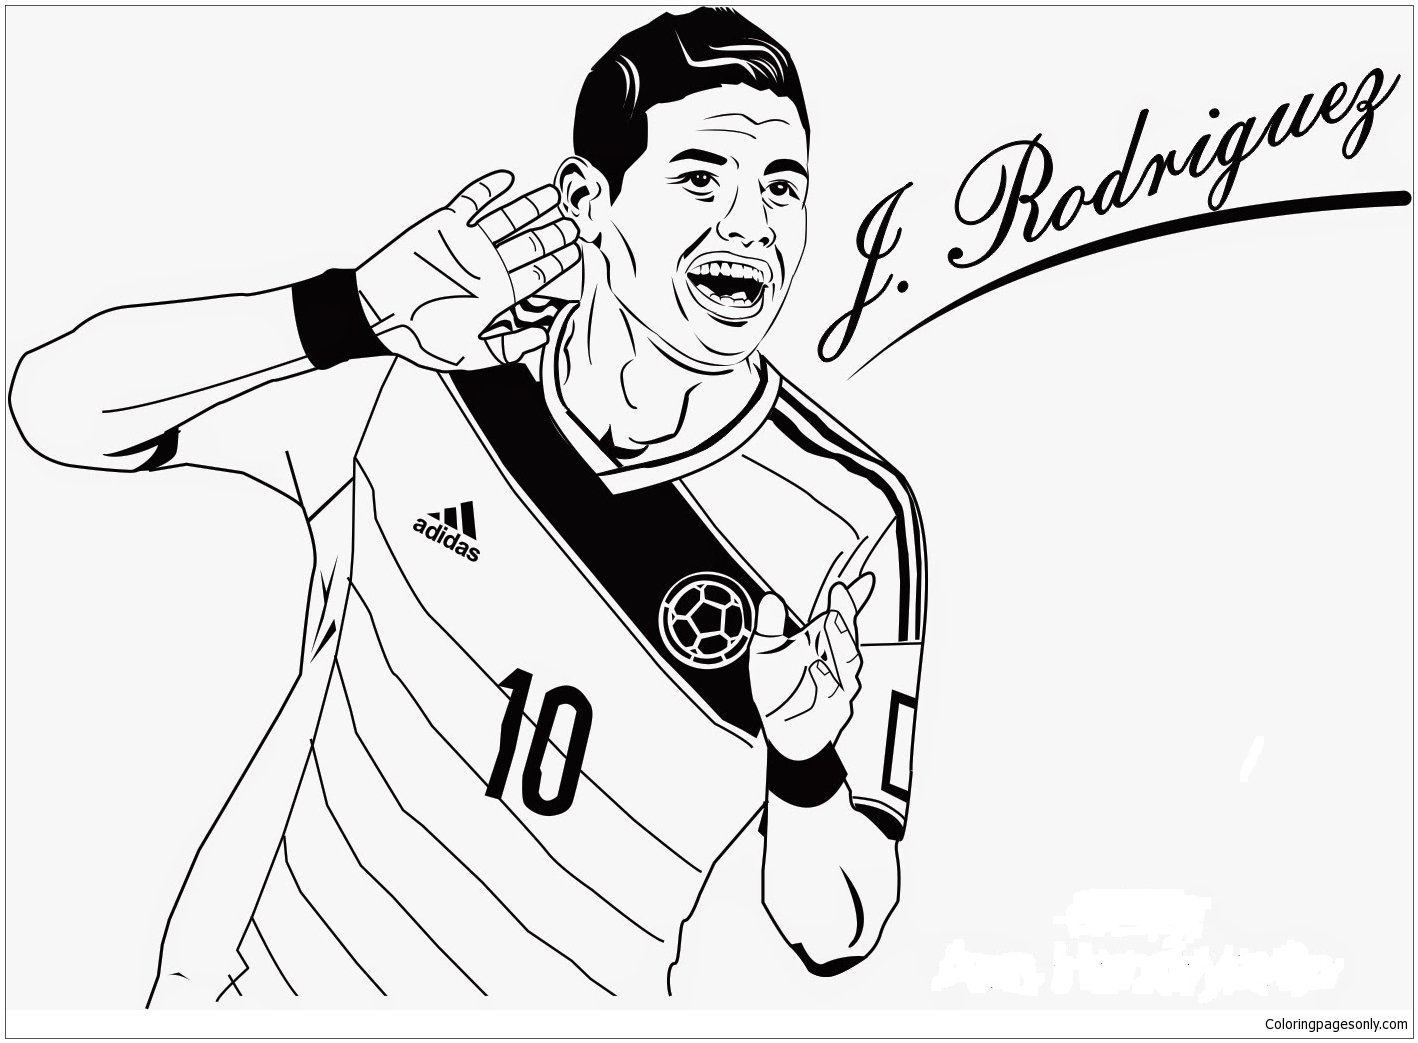 James Rodriguez-image 7 Coloring Pages